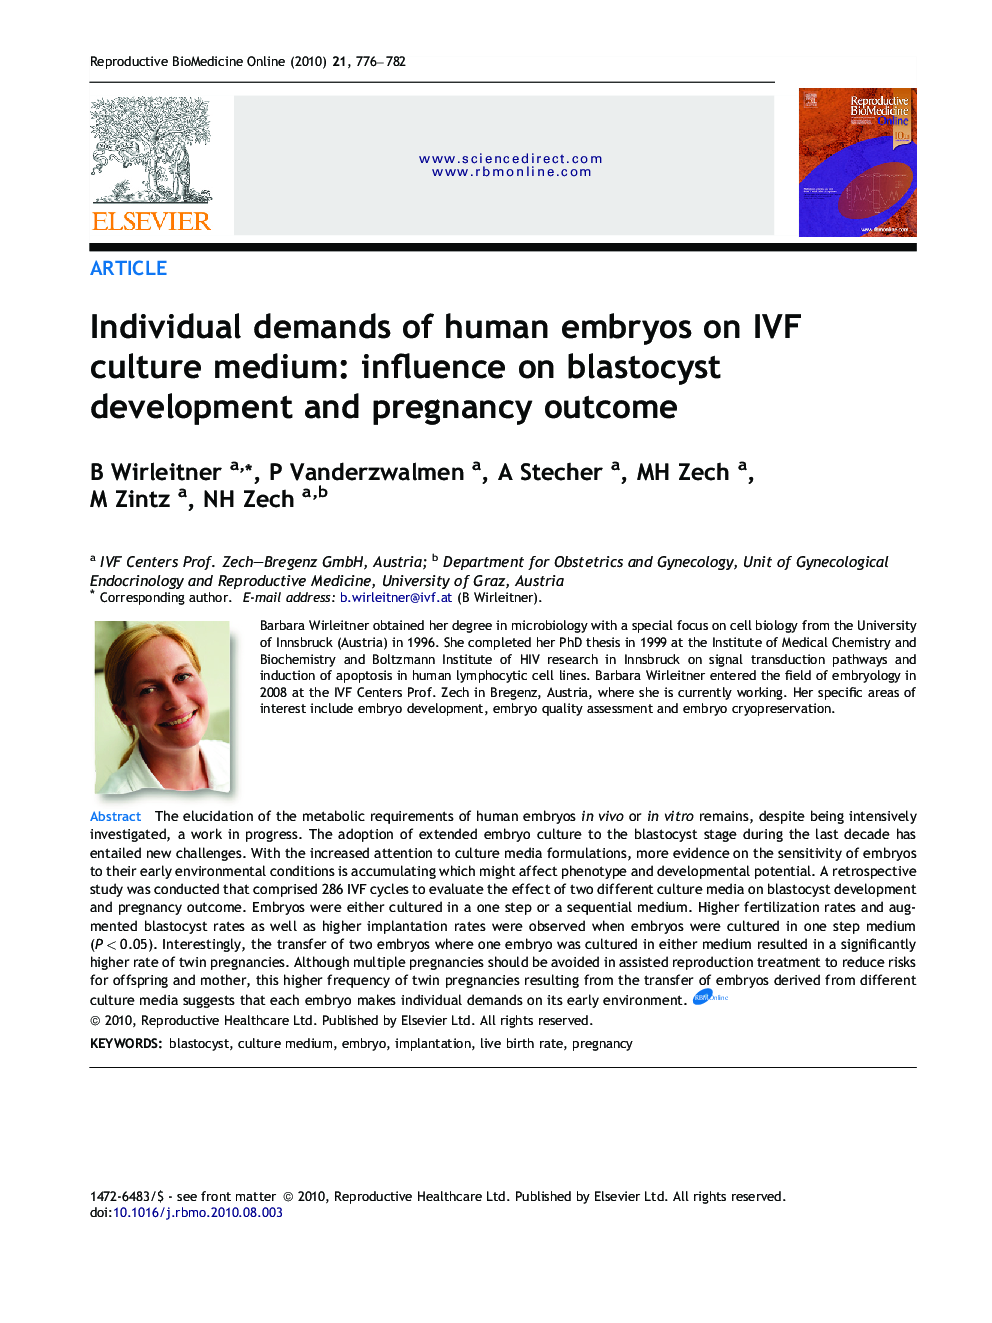 Individual demands of human embryos on IVF culture medium: influence on blastocyst development and pregnancy outcome